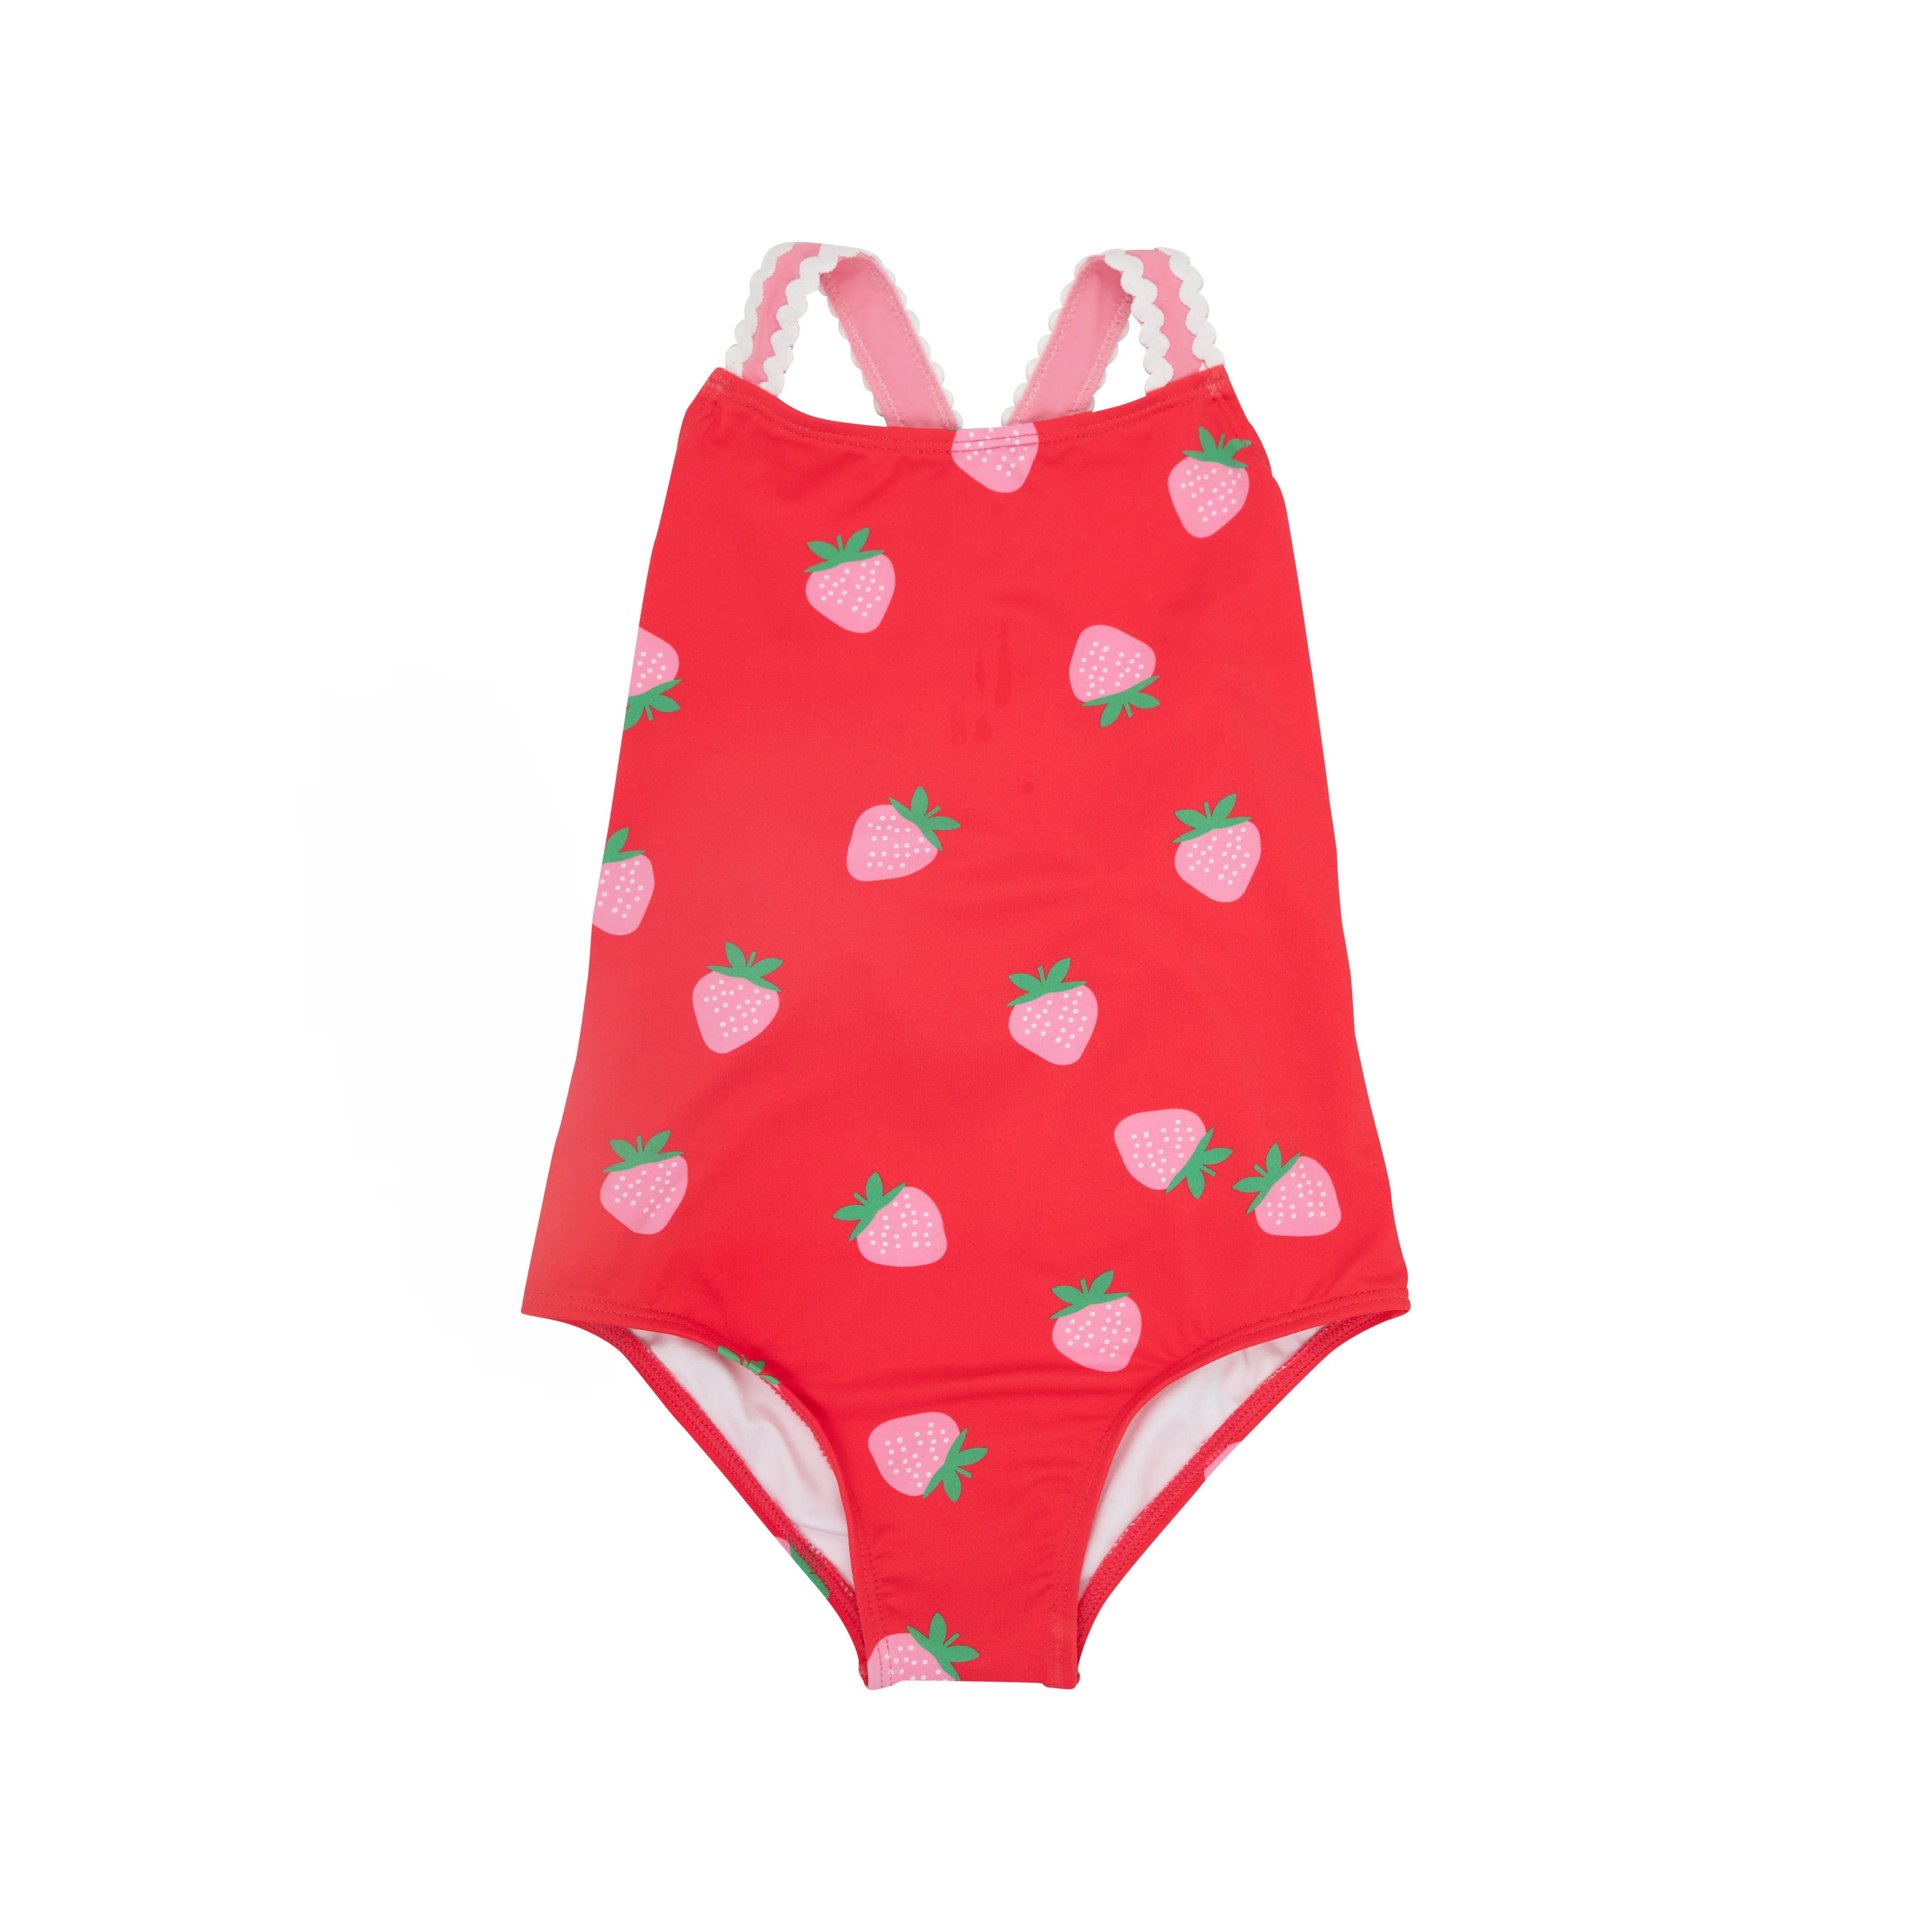 Taylor Bay Bathing Suit - Sanibel Strawberry with Hamptons Hot Pink & Worth Avenue White | The Beaufort Bonnet Company